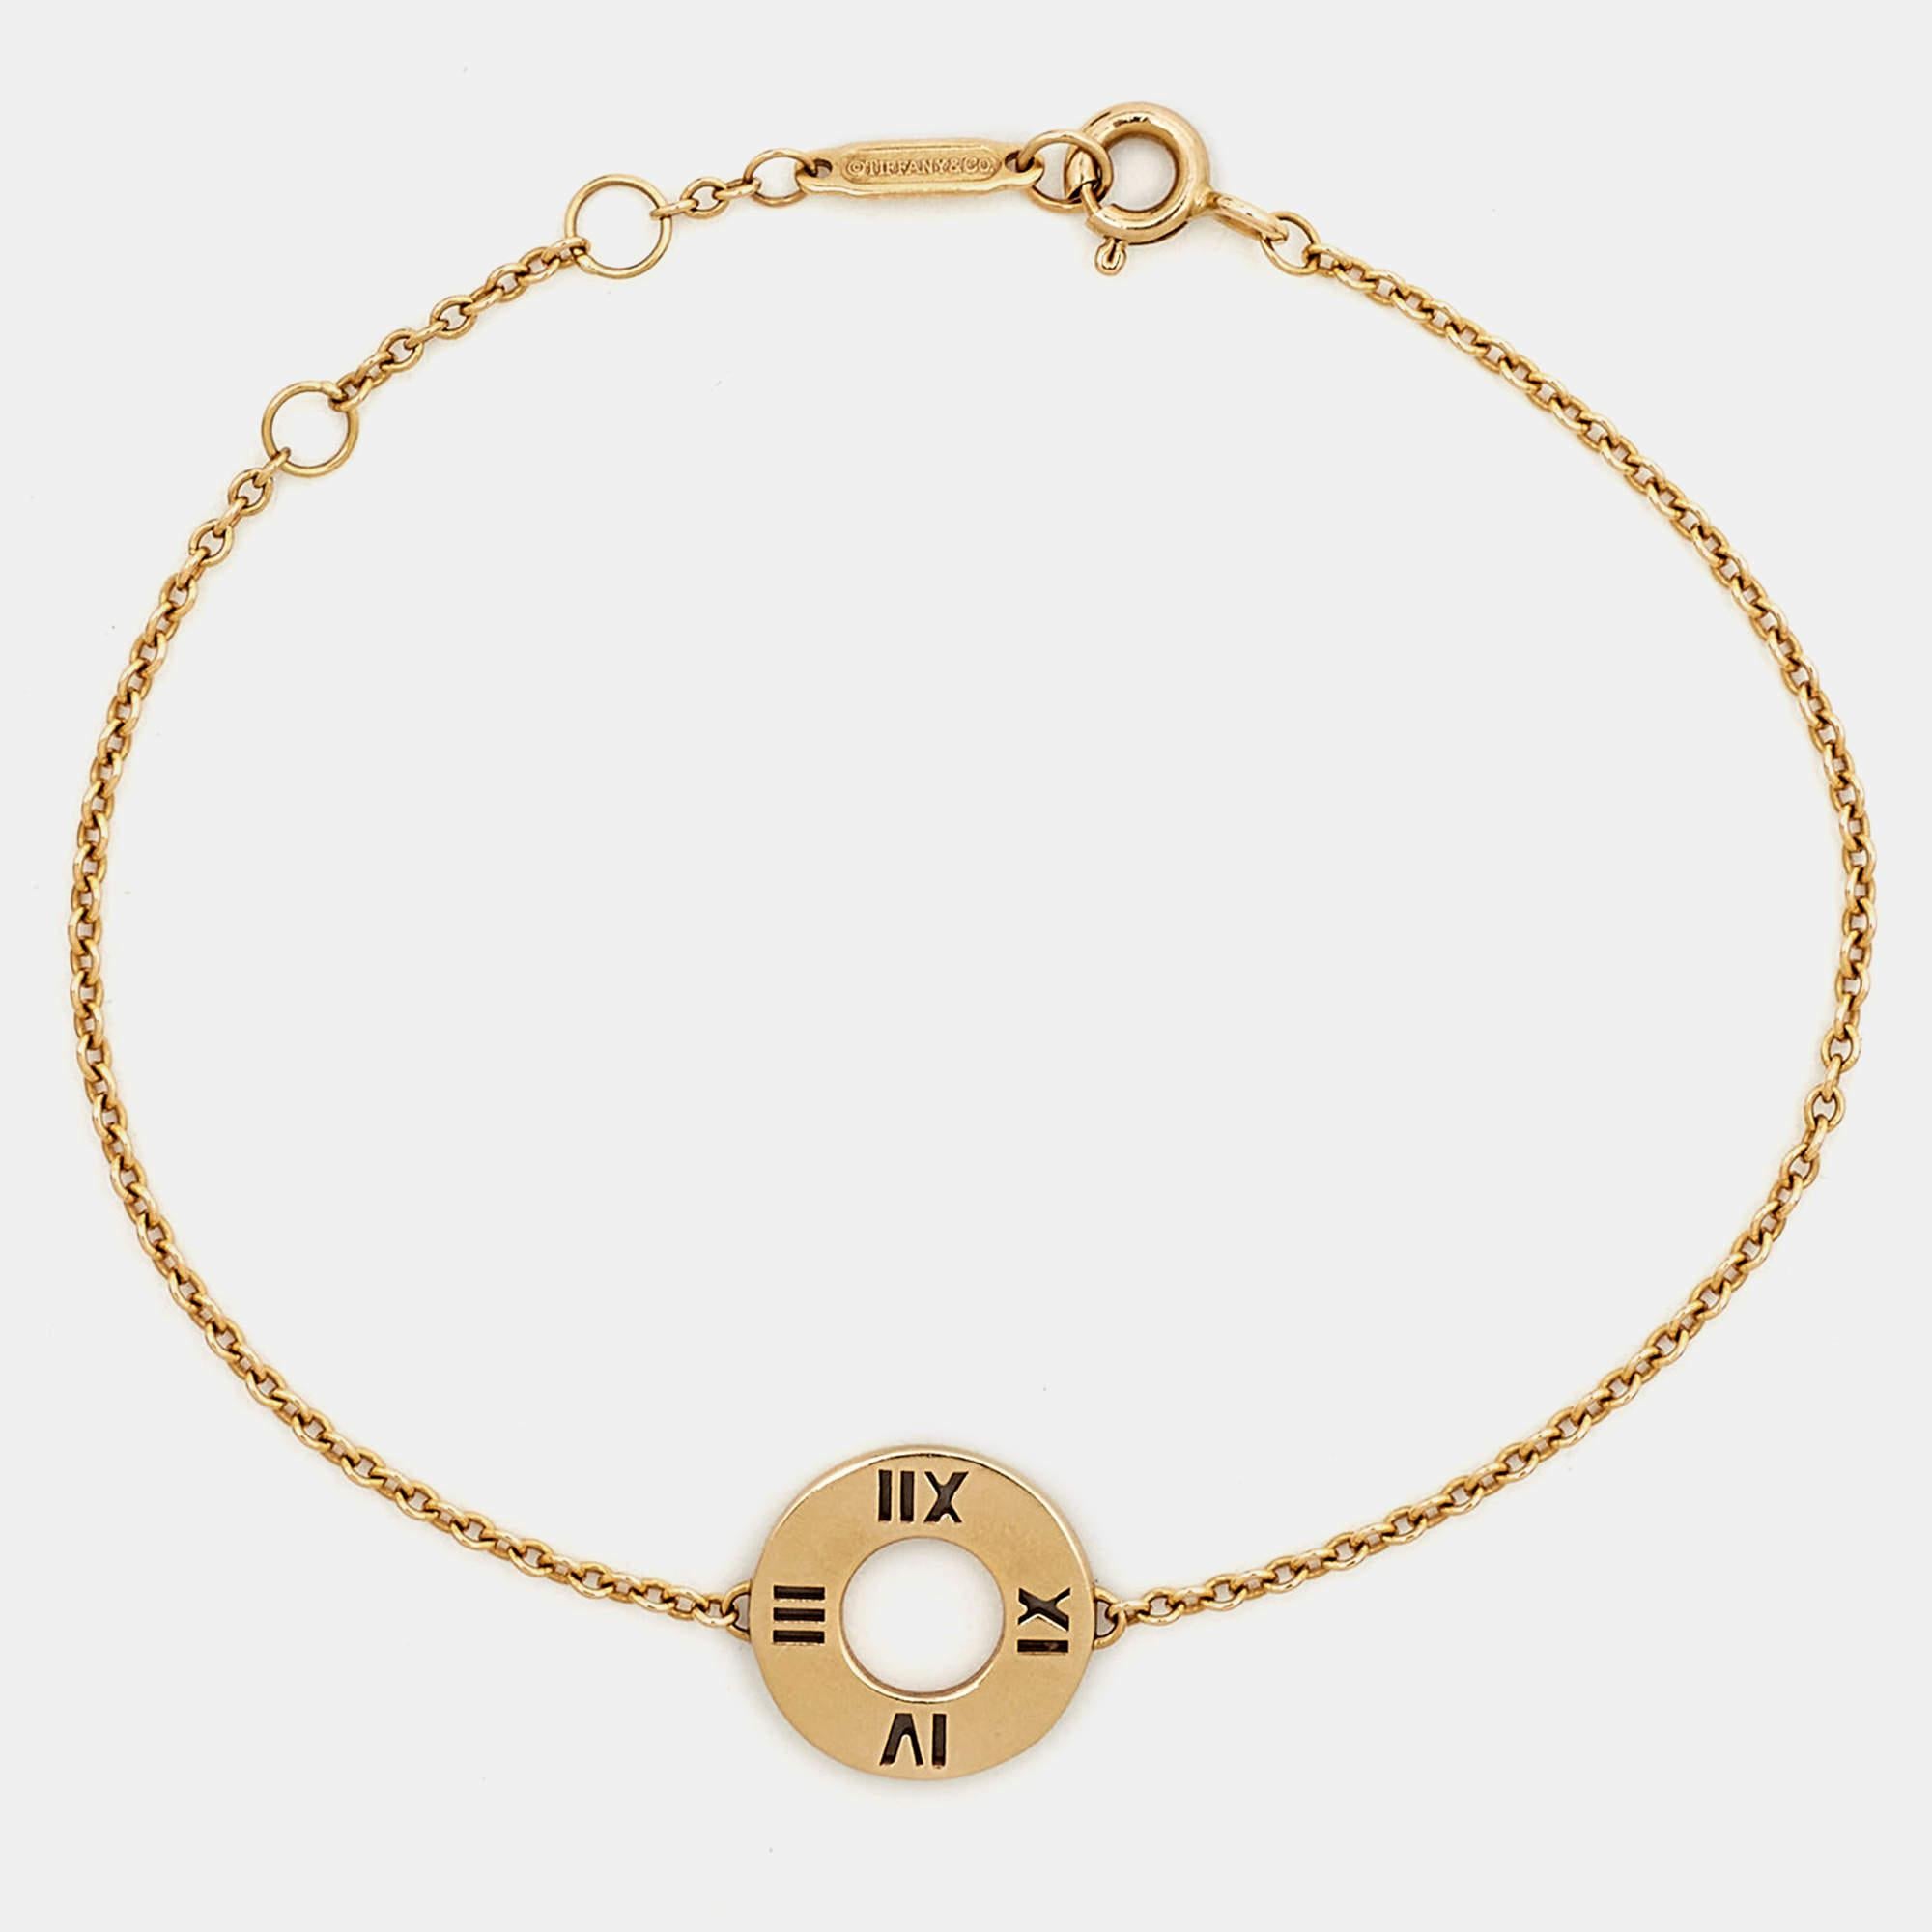 The Atlas collection by Tiffany & Co. was introduced in the year 1995 and it stands to embody the strength of this timeless brand. This bracelet is from that collection and it is so beautiful, it deserves to be on you. Made from 18k rose gold, the